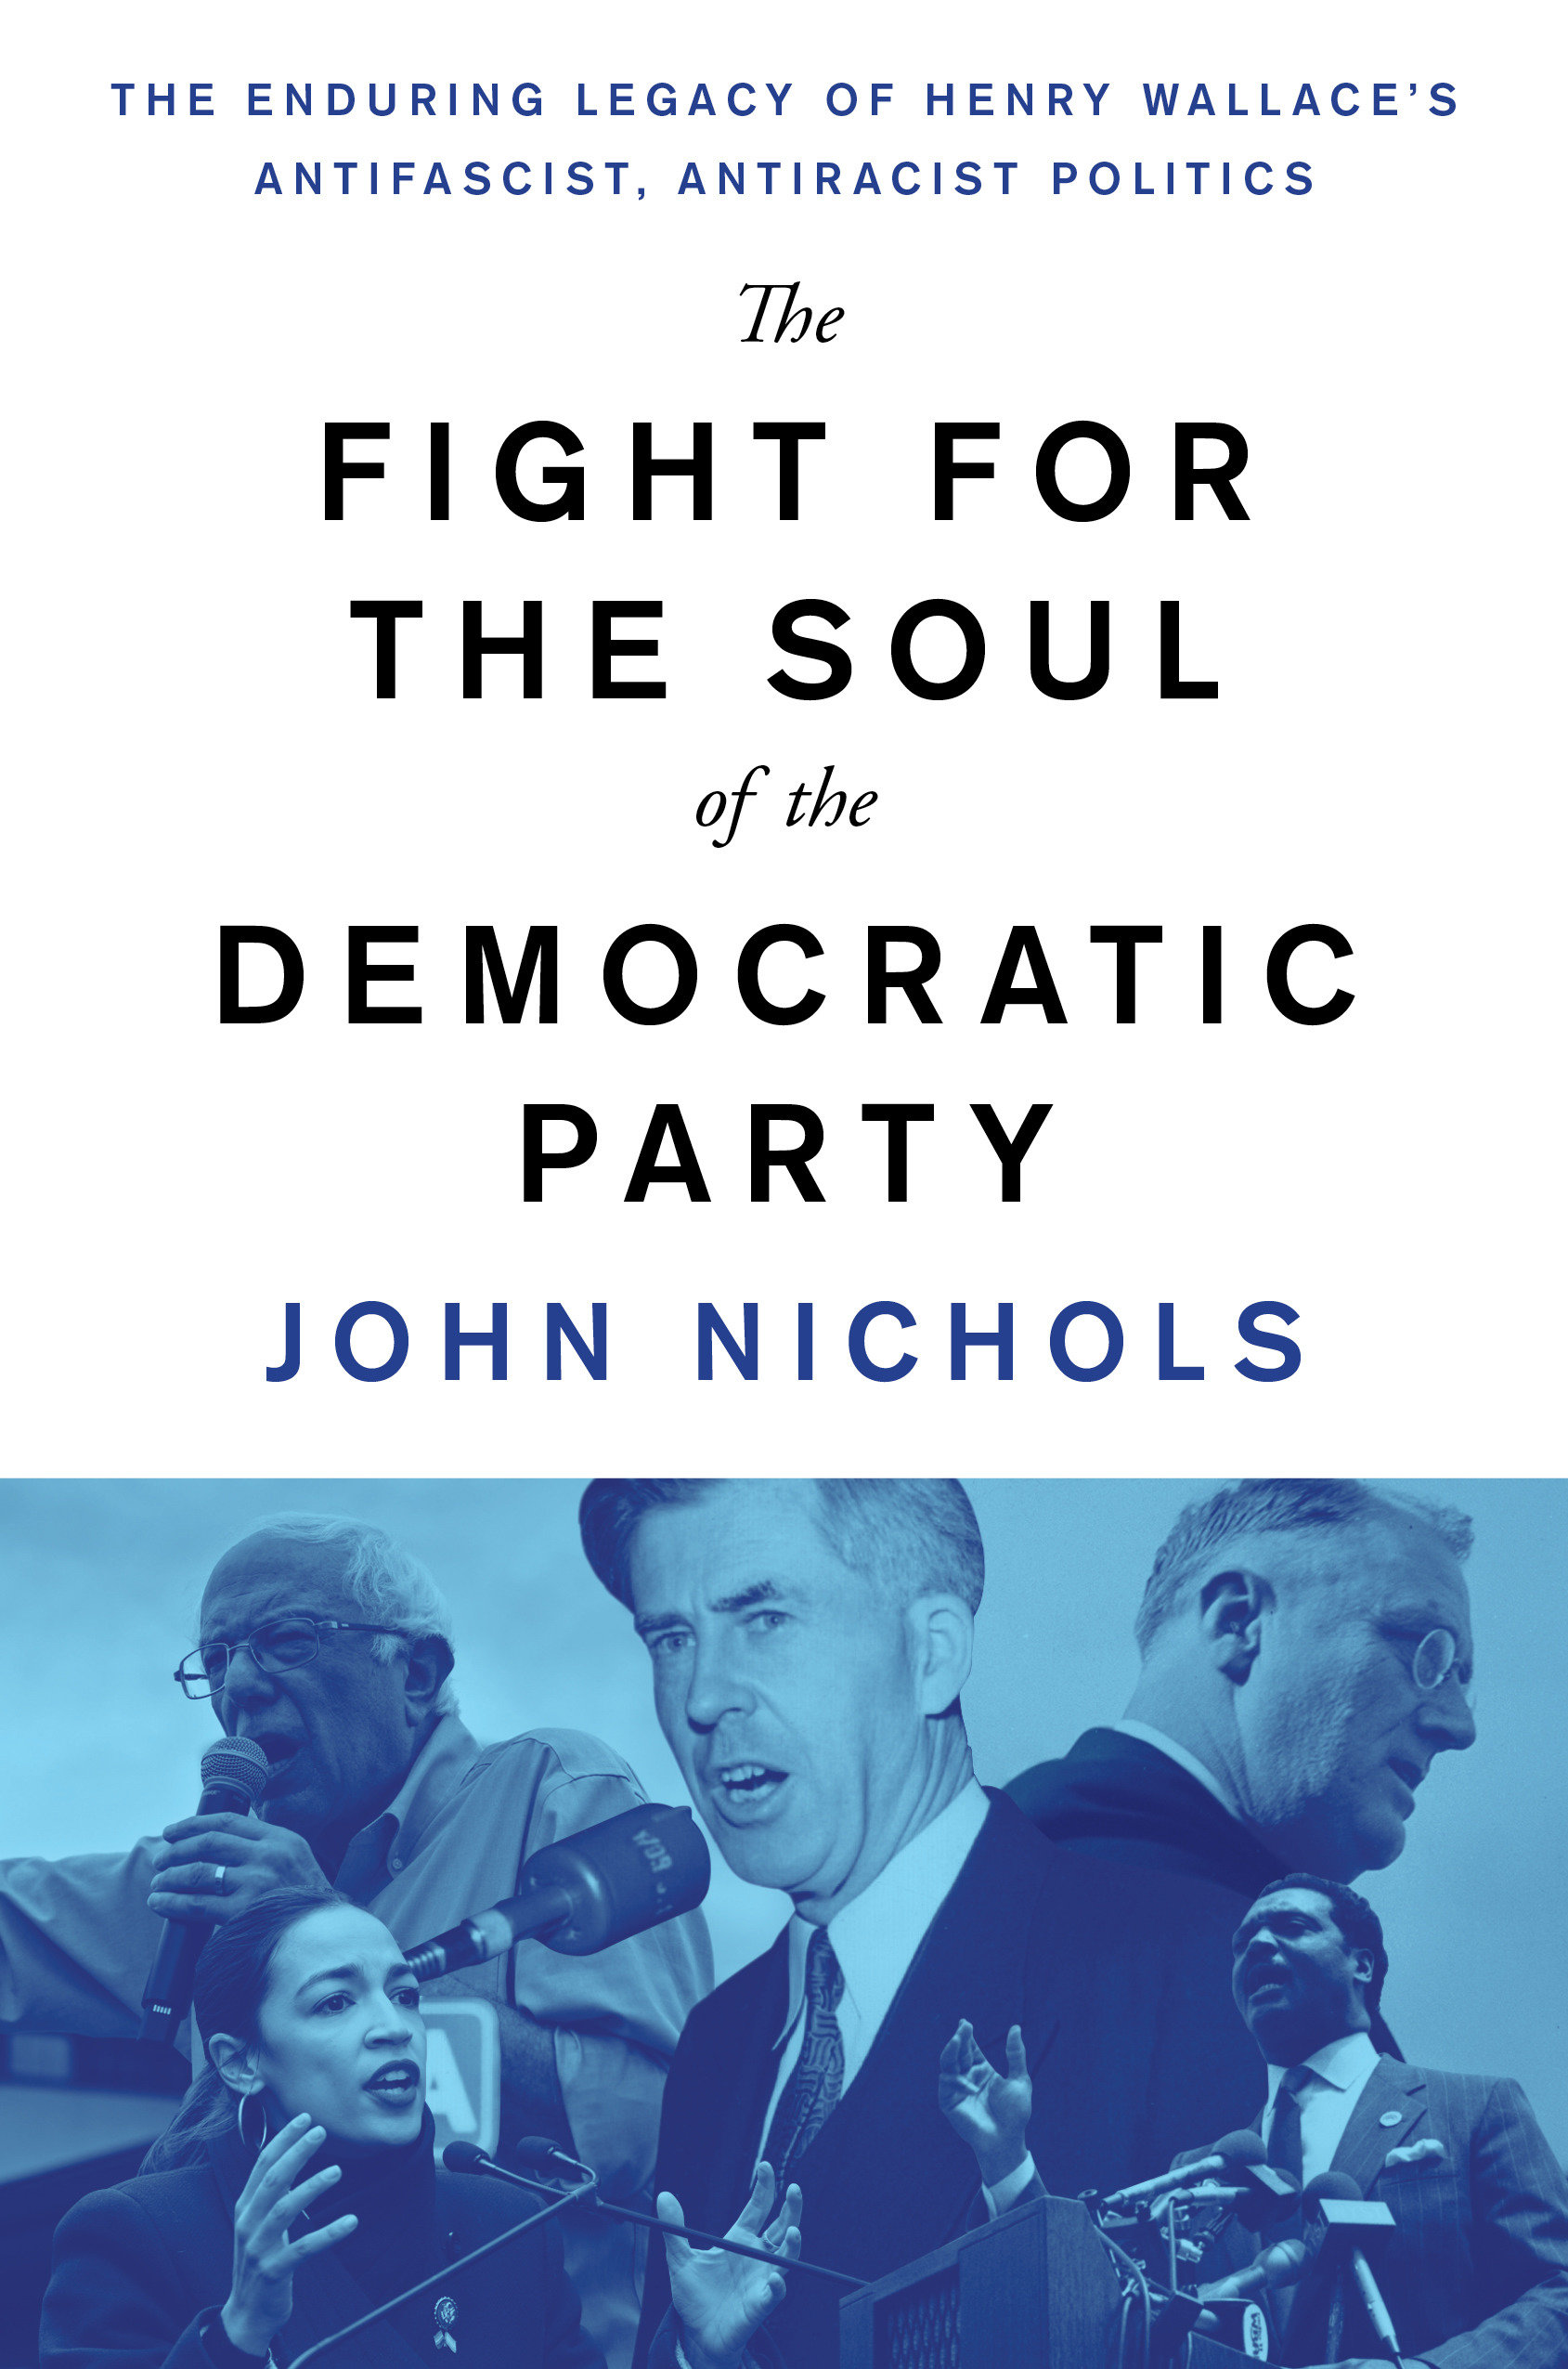 The Fight for The Soul Of The Democratic Party (Hardcover Book)